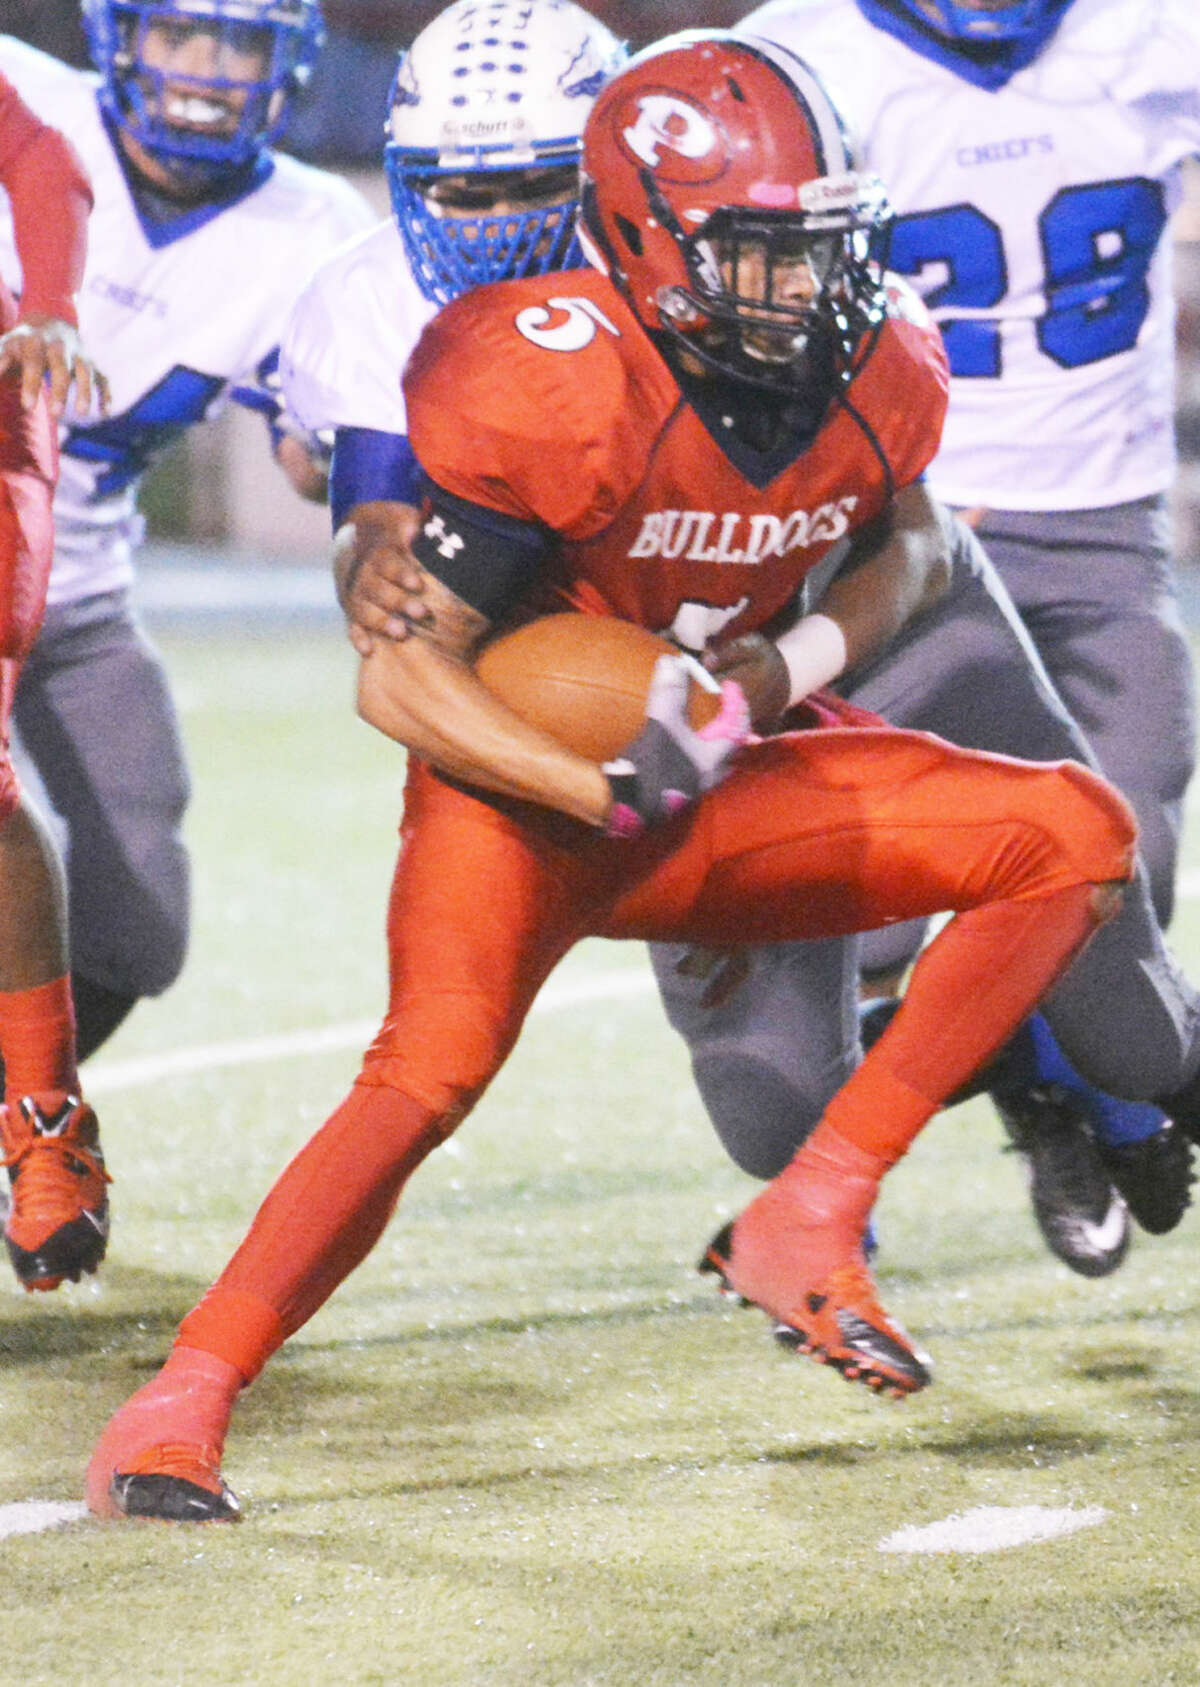 Plainview running back Warren Flye darts for yardage against San Angelo Lake View Friday night. The speedy senior set a Plainview school record with 504 yards rushing in the game. He broke the previous record of 466 yards set by Jamar Wall in 2005.